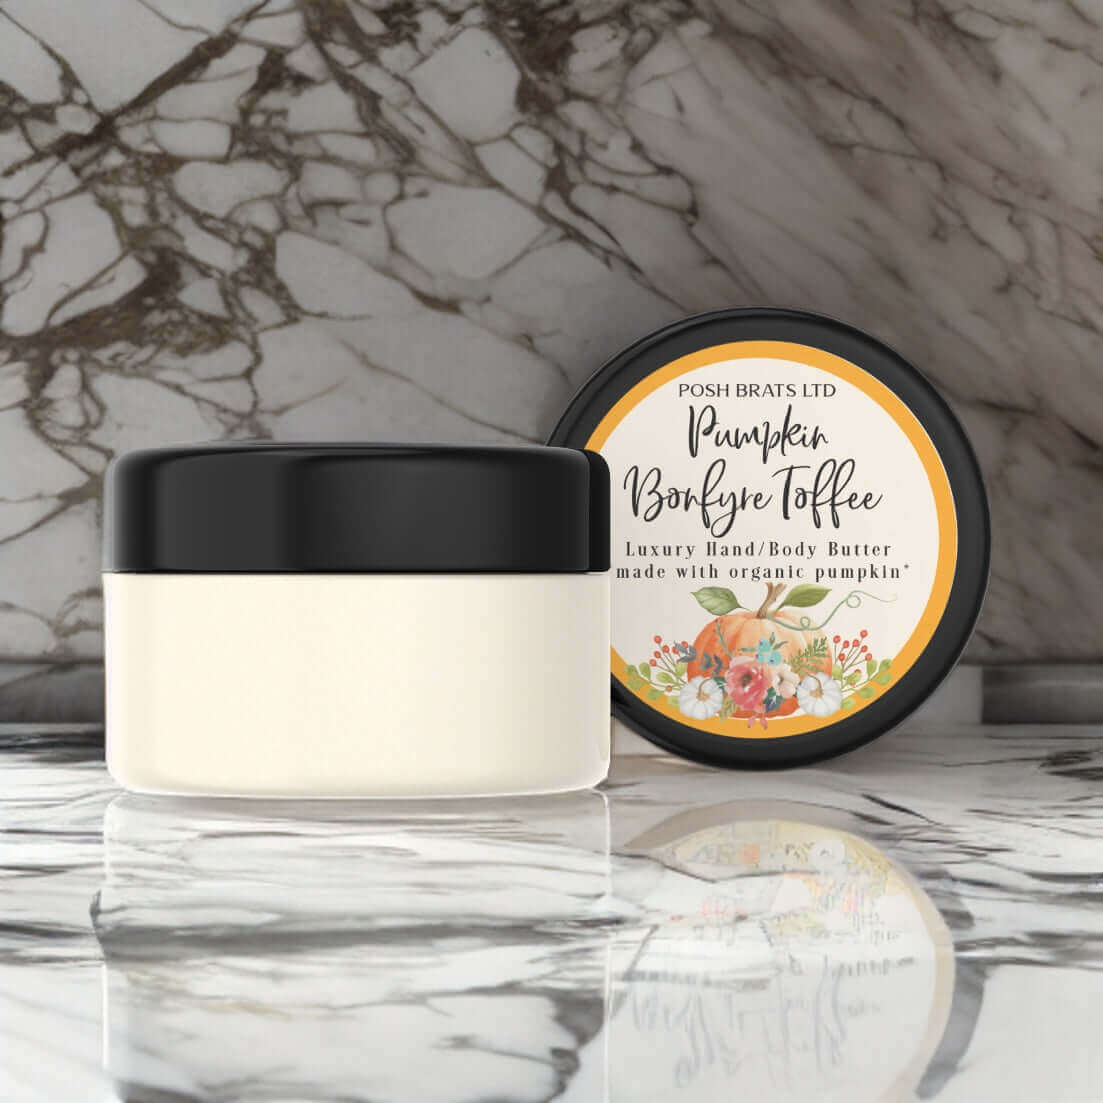 Treat your skin to our Pumpkin Bonfyre Toffee Hand & Body Butter. It's luxury in a jar!